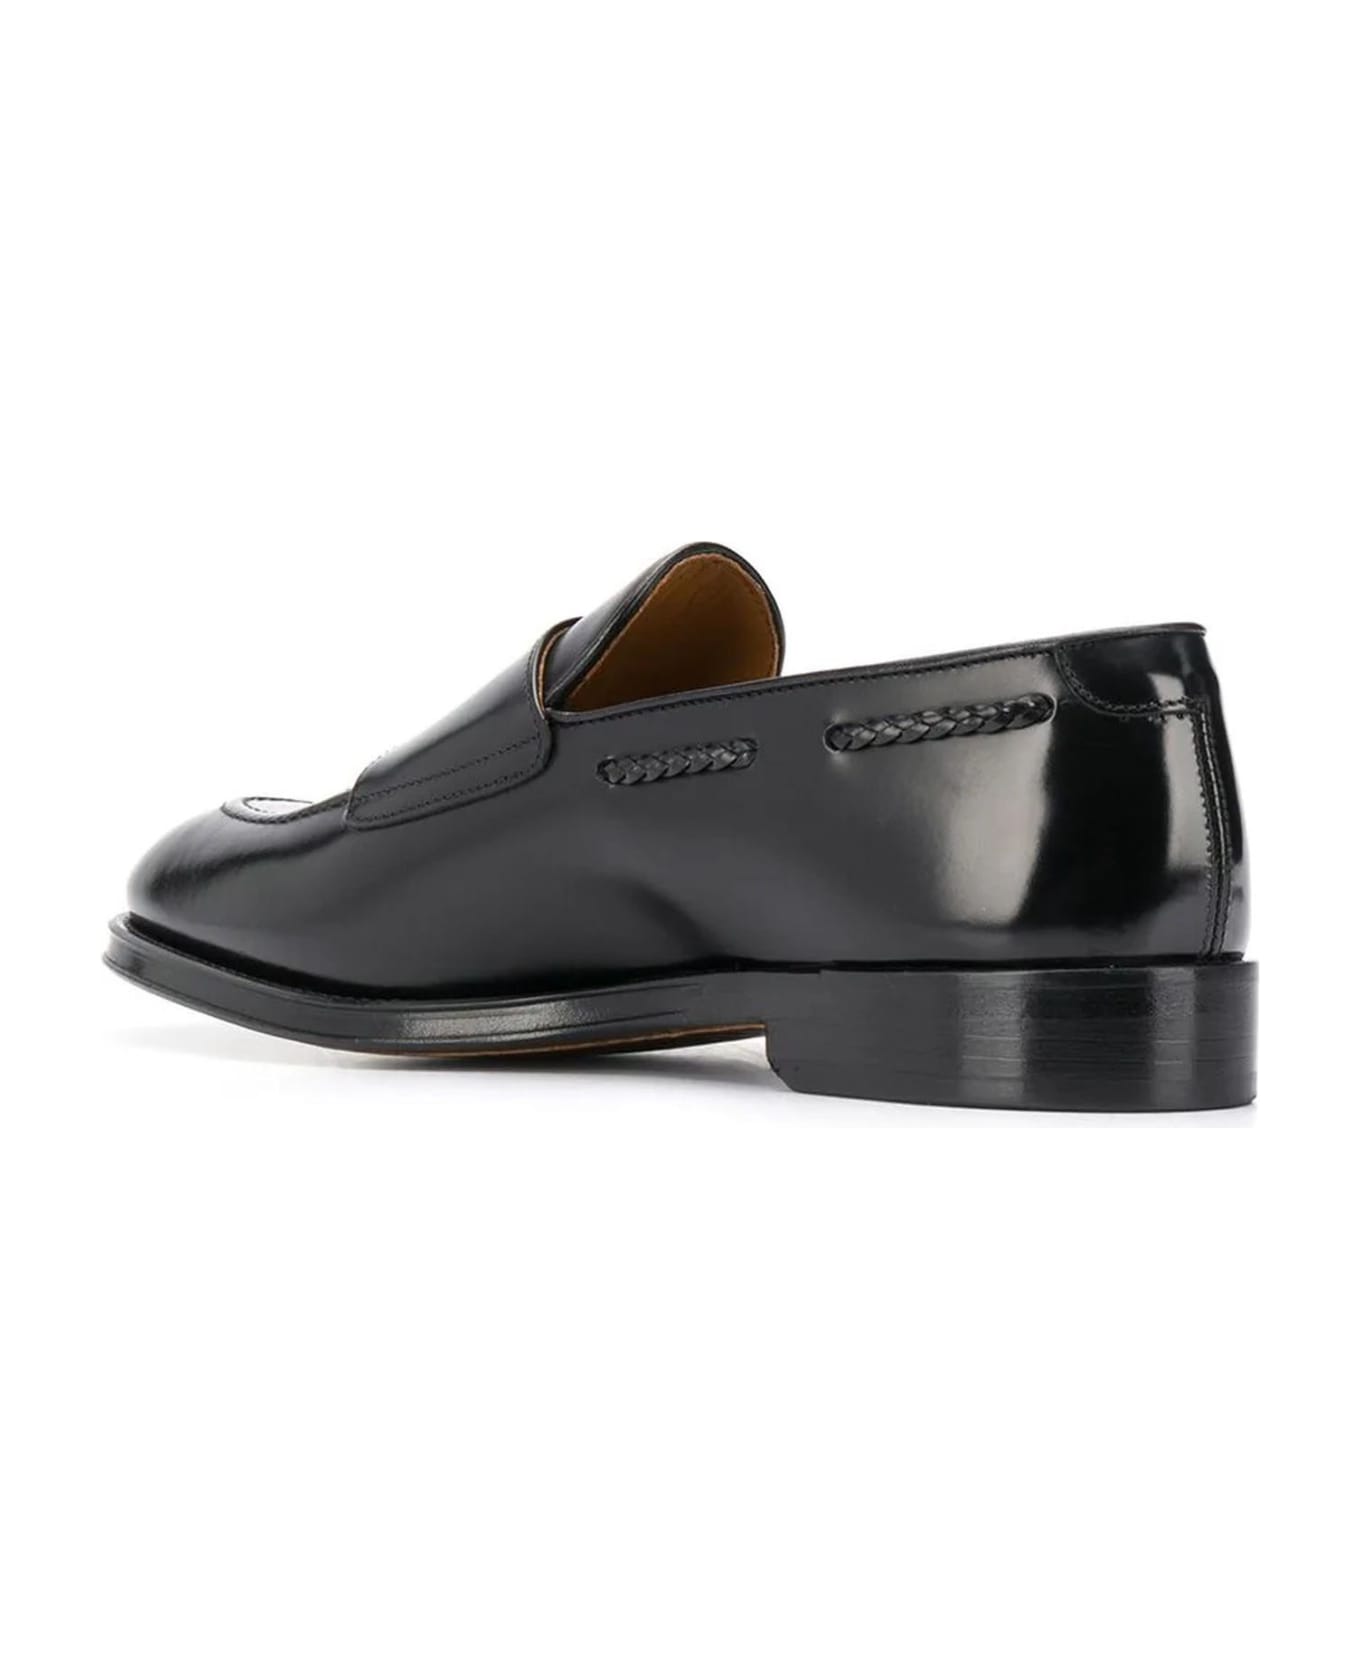 Doucal's Black Leather Polished Monk Shoes - Black ローファー＆デッキシューズ